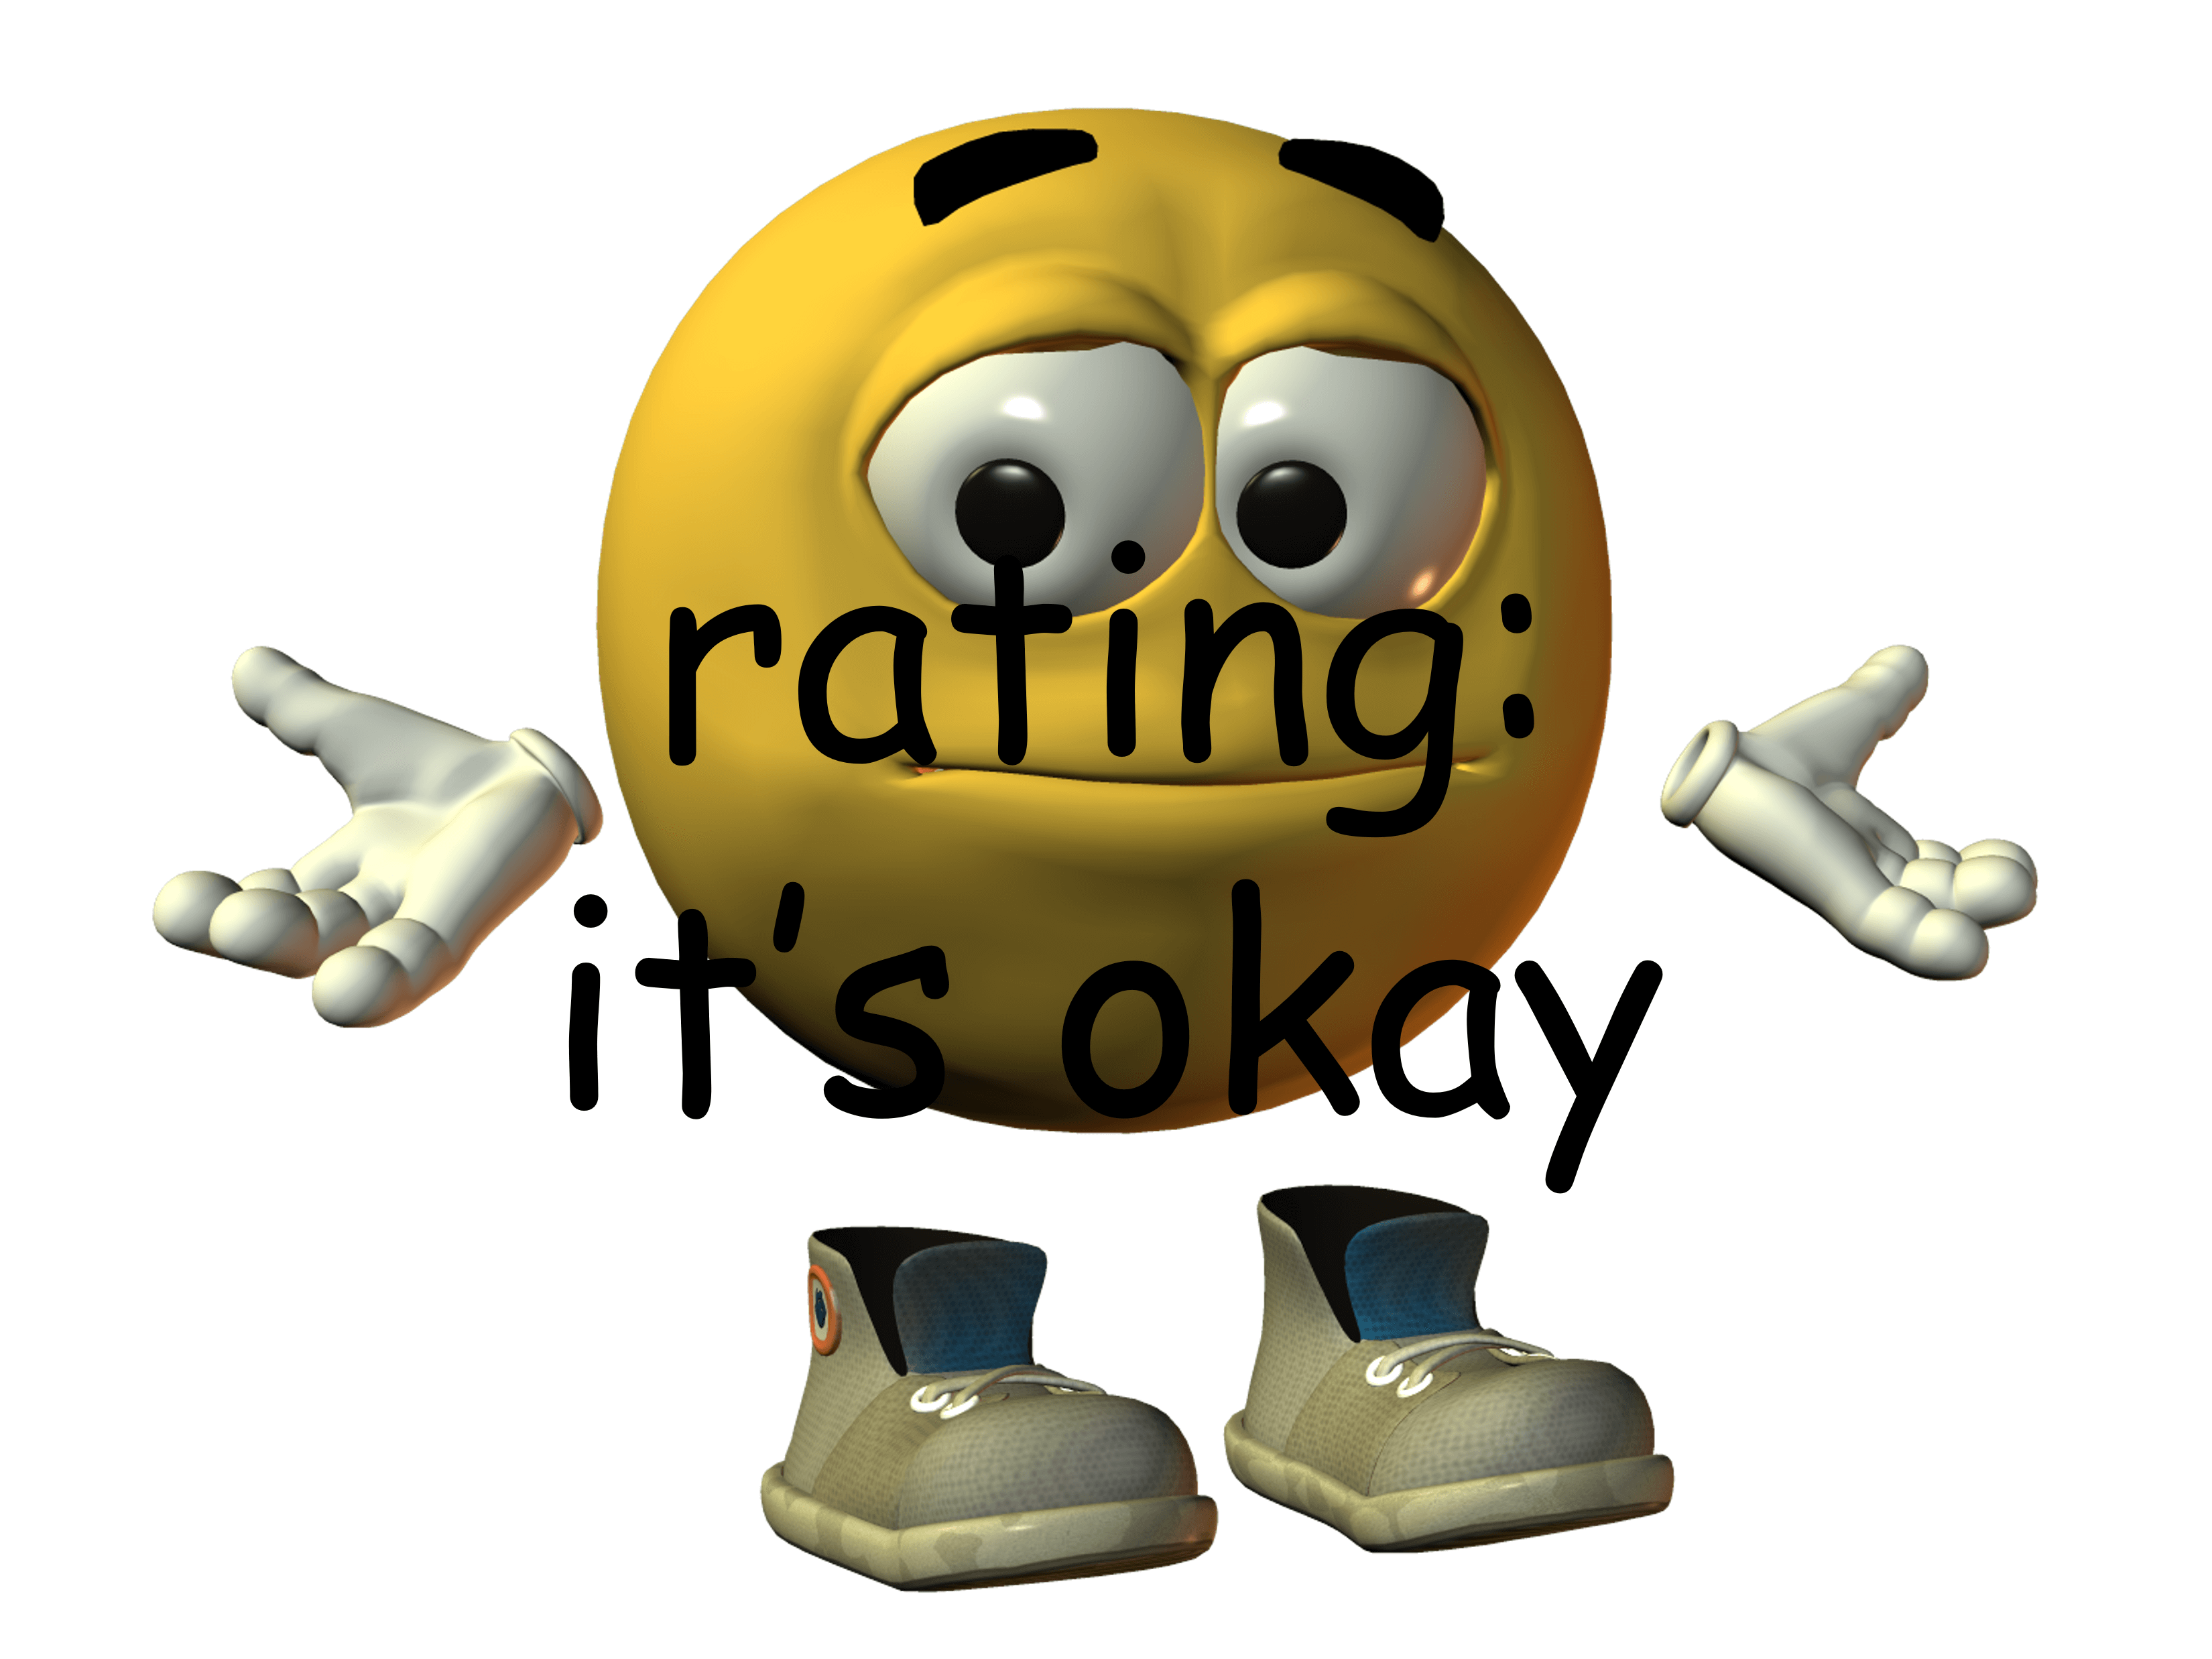 A picture of a yellow emoji with hands and feet shrugging with a neutral expression on its face. There is black text over the emoji that says: Rating: It's okay